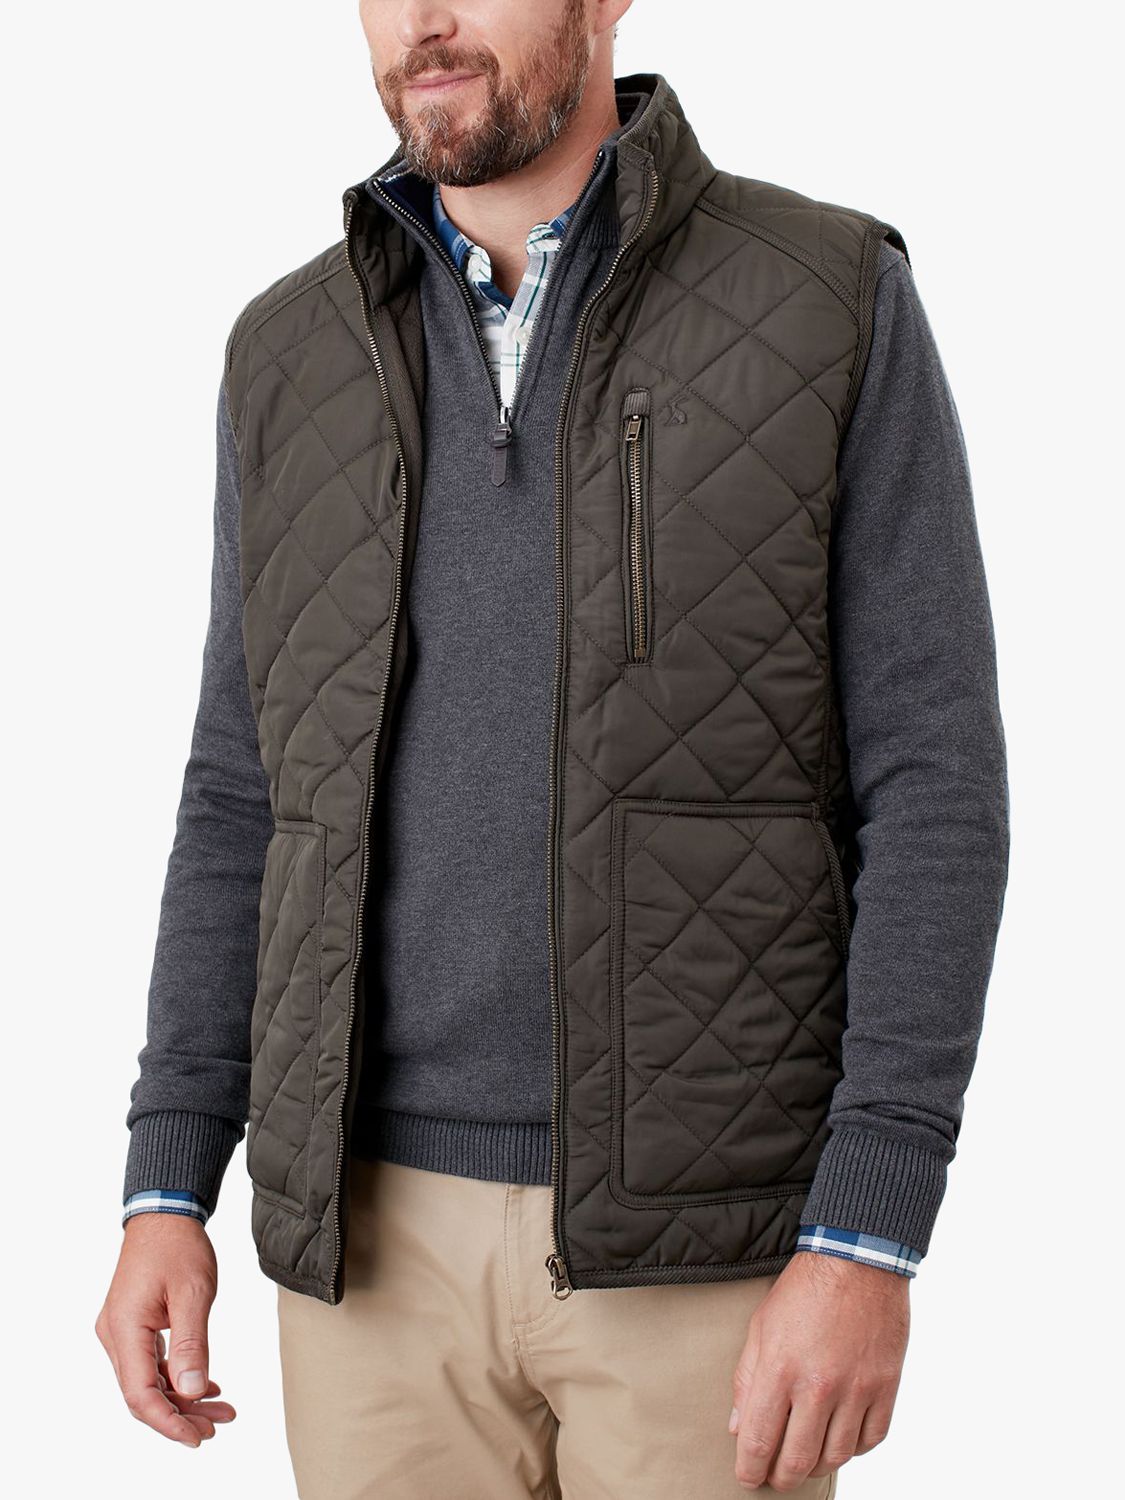 Joules Halesworth Quilted Gilet, Dark Pine at John Lewis & Partners